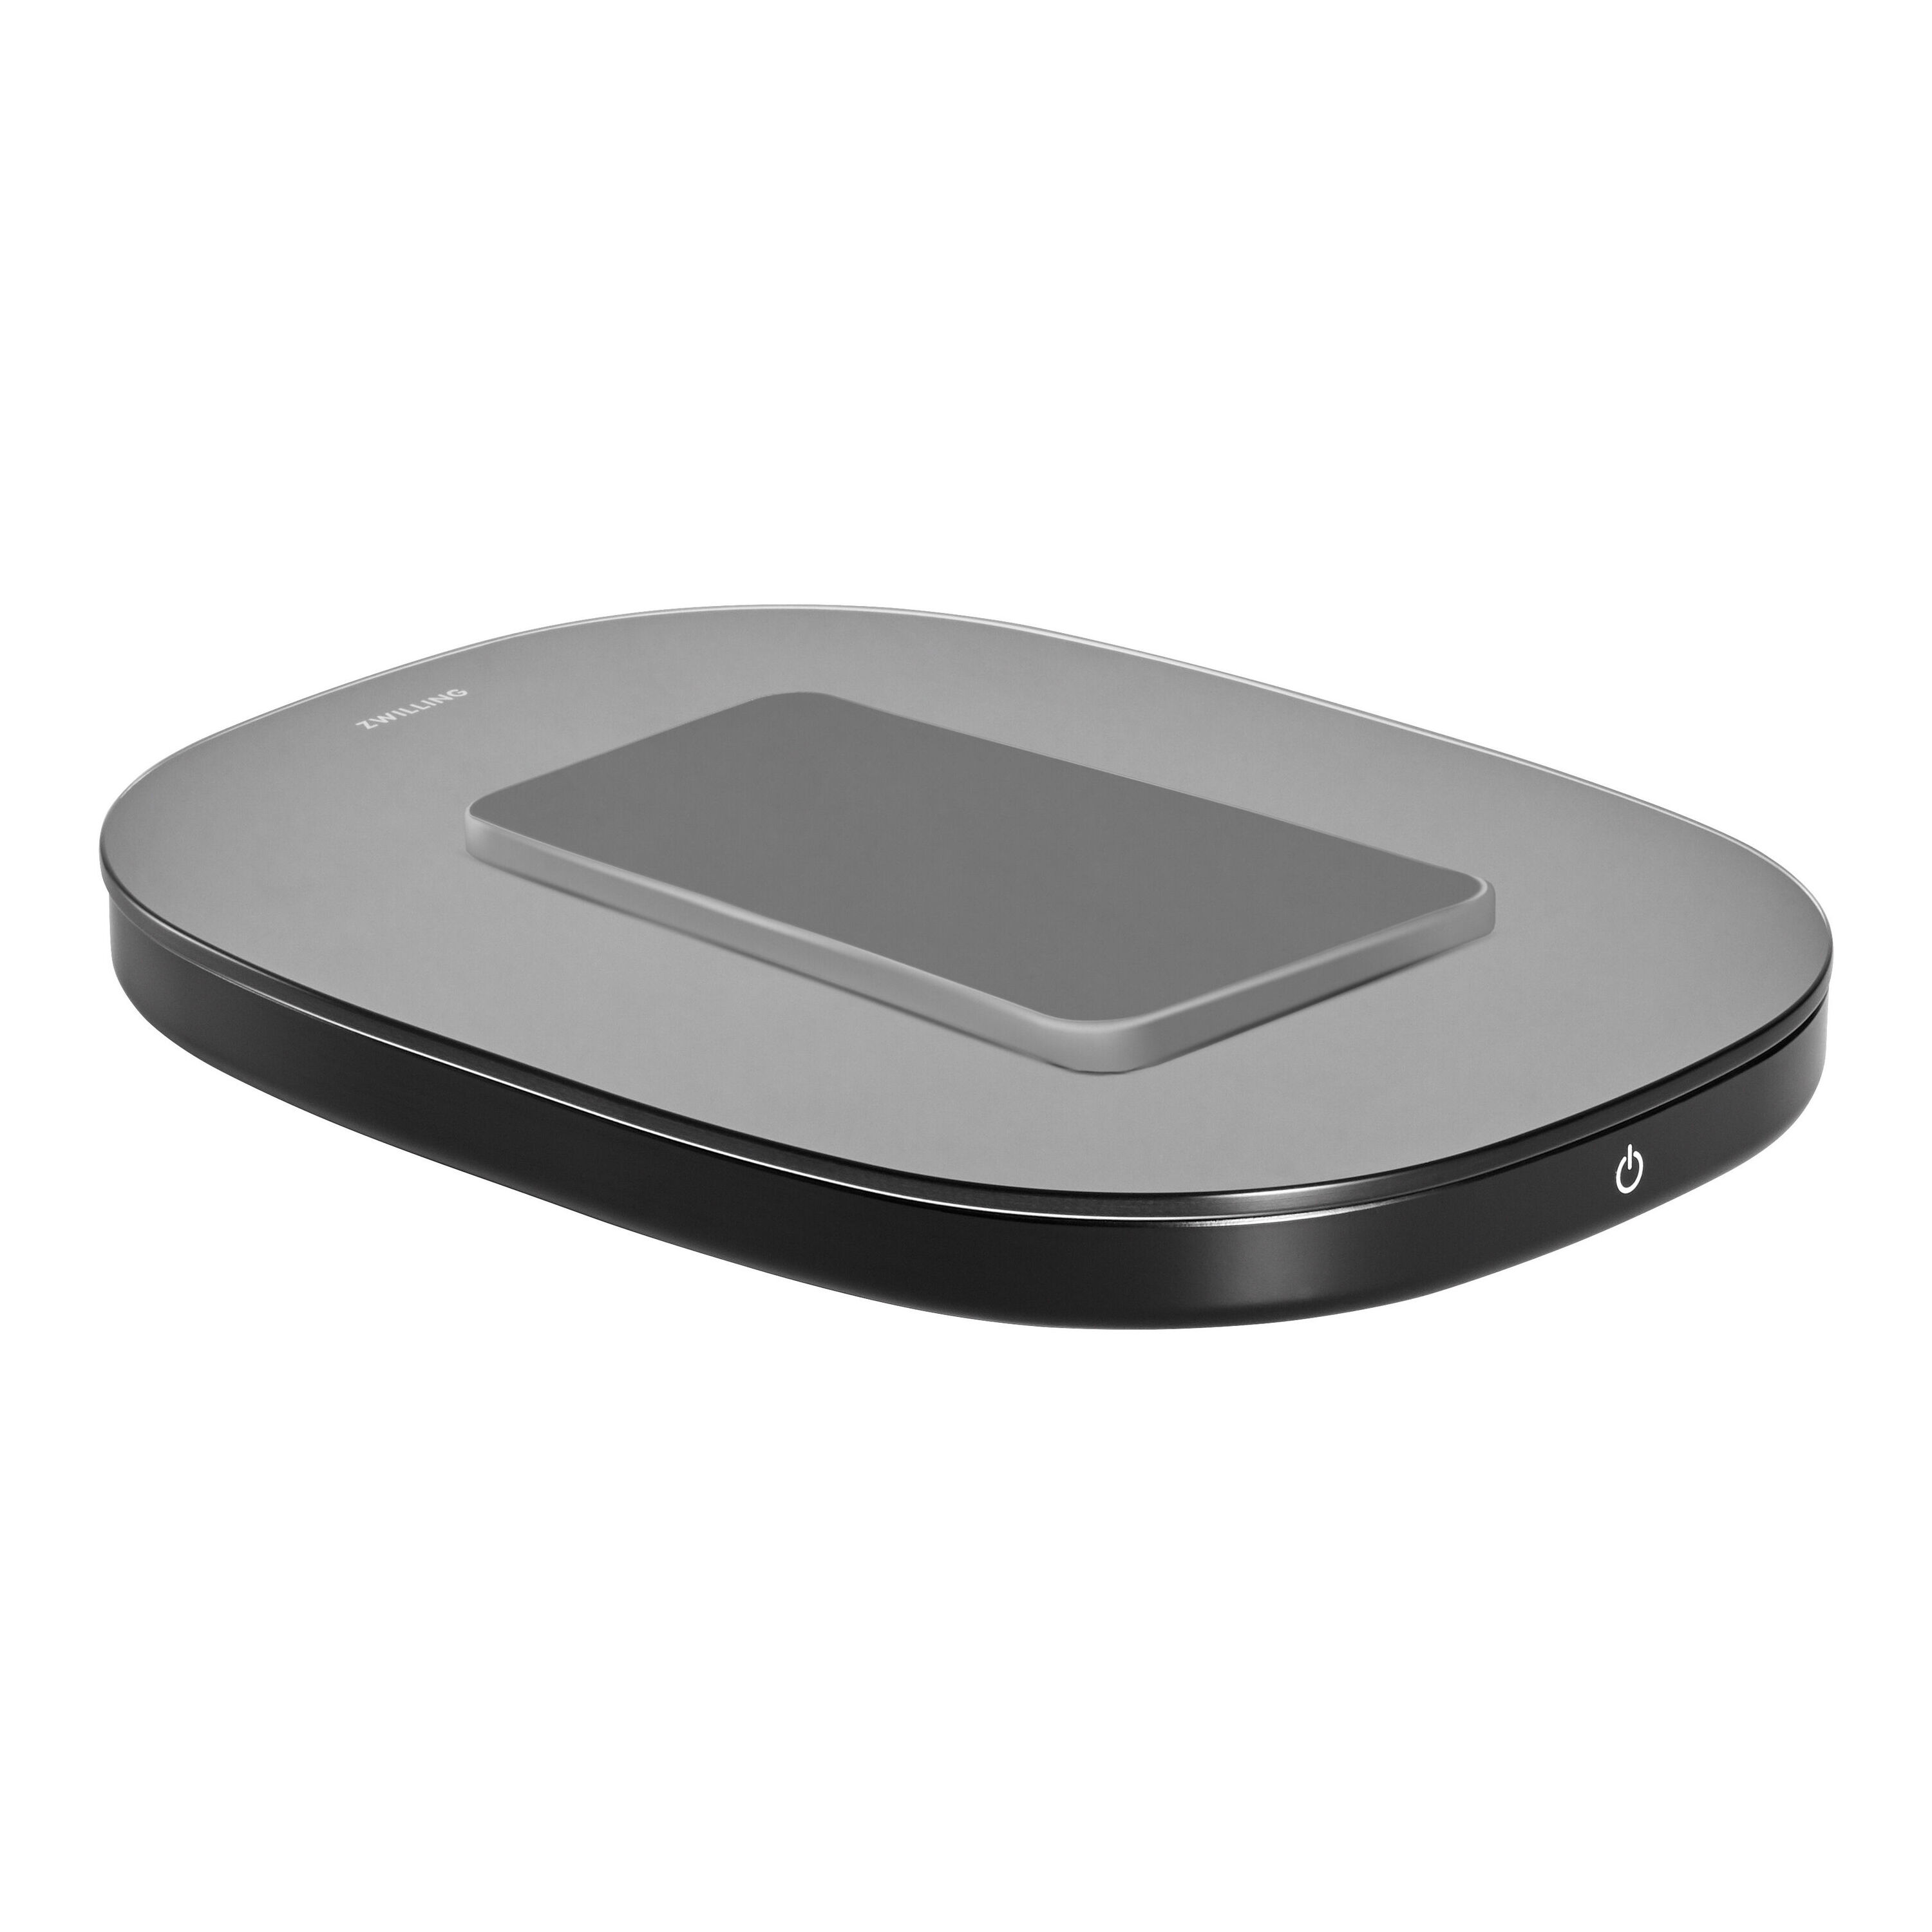 https://www.zwilling.com/on/demandware.static/-/Sites-zwilling-master-catalog/default/dw61152ae7/images/large/wireless_charging_scale_white_smartphone.jpg